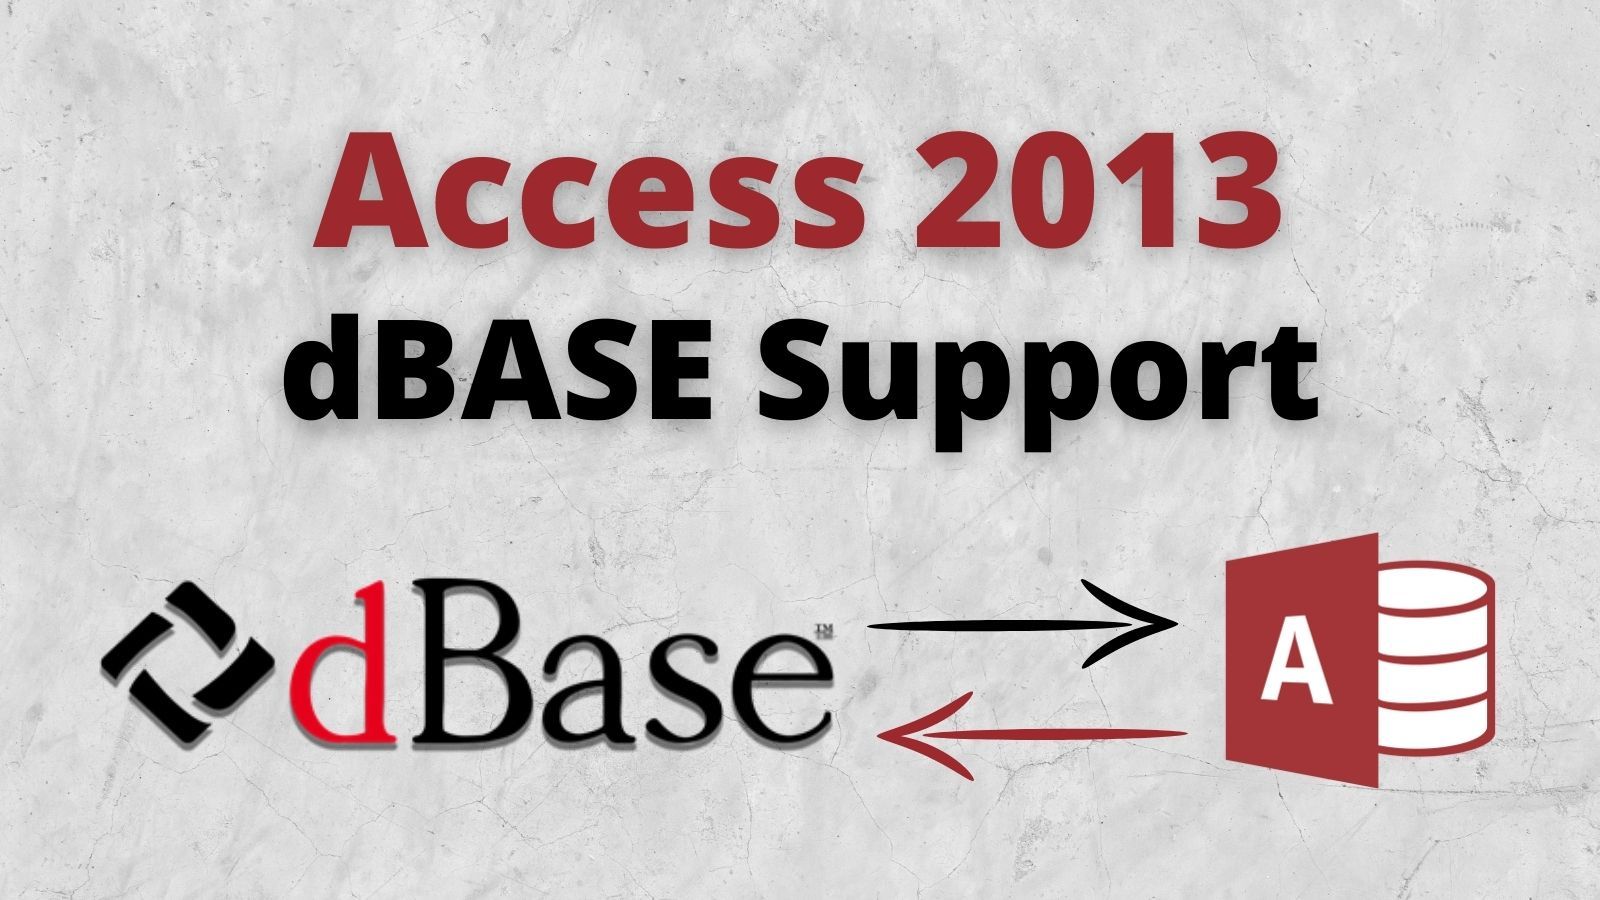 Simple Fix for Missing DBF Support in Access 2013